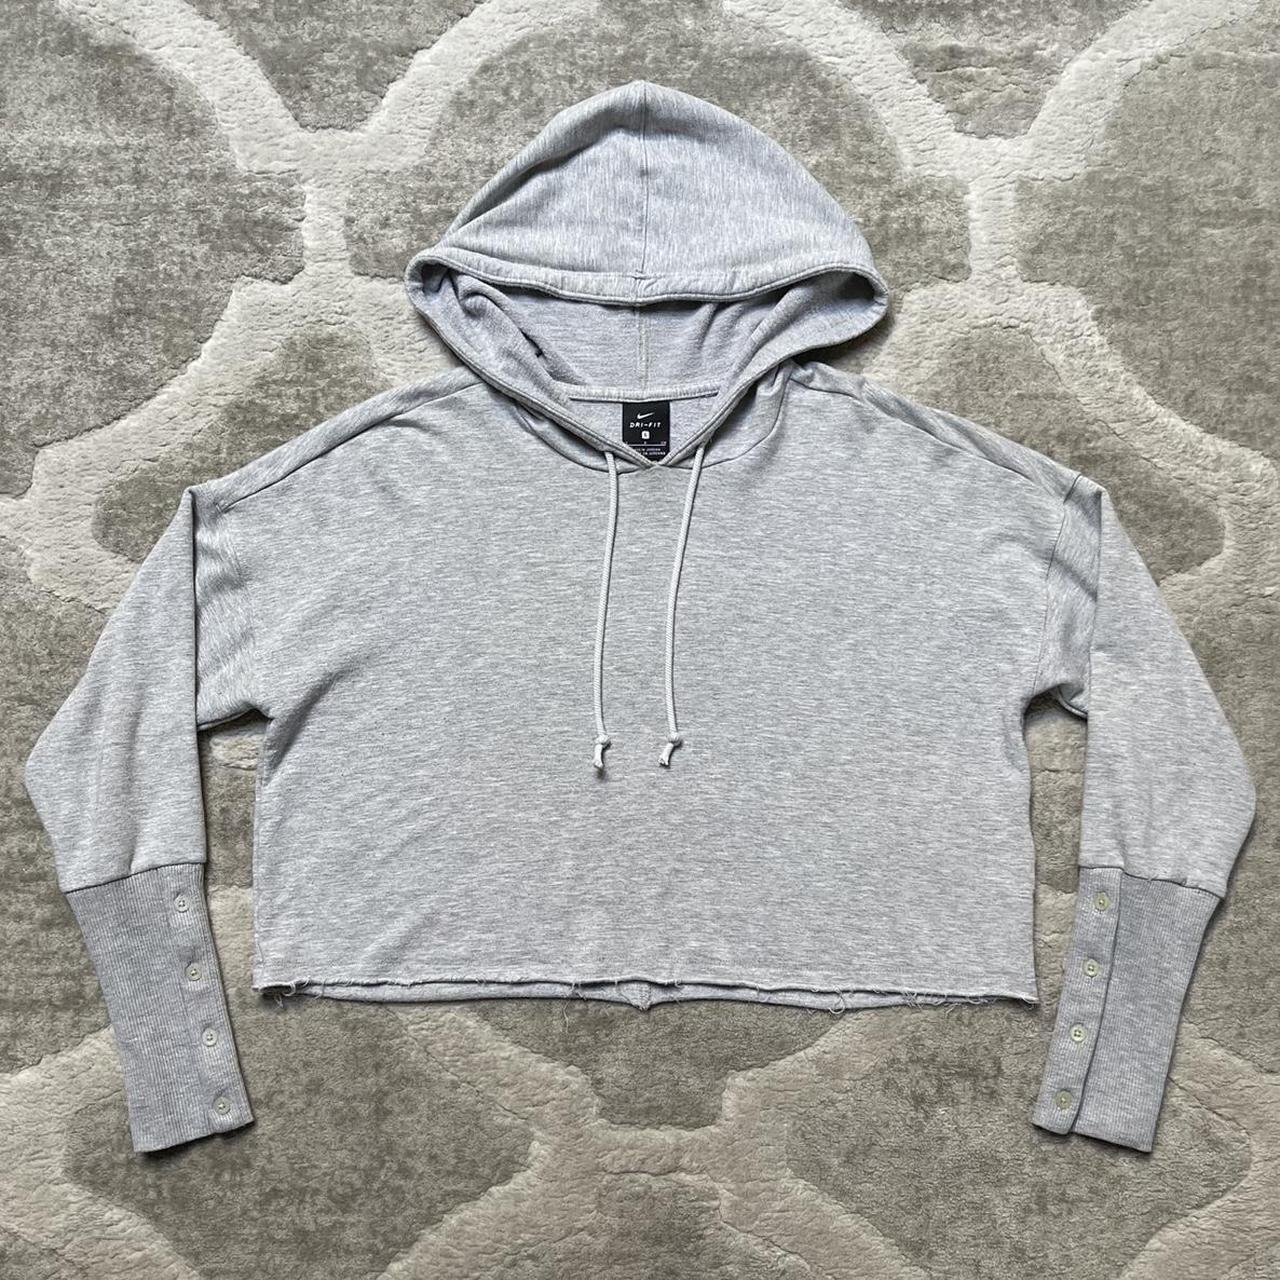 Nike Yoga luxe cropped hoodie in gray